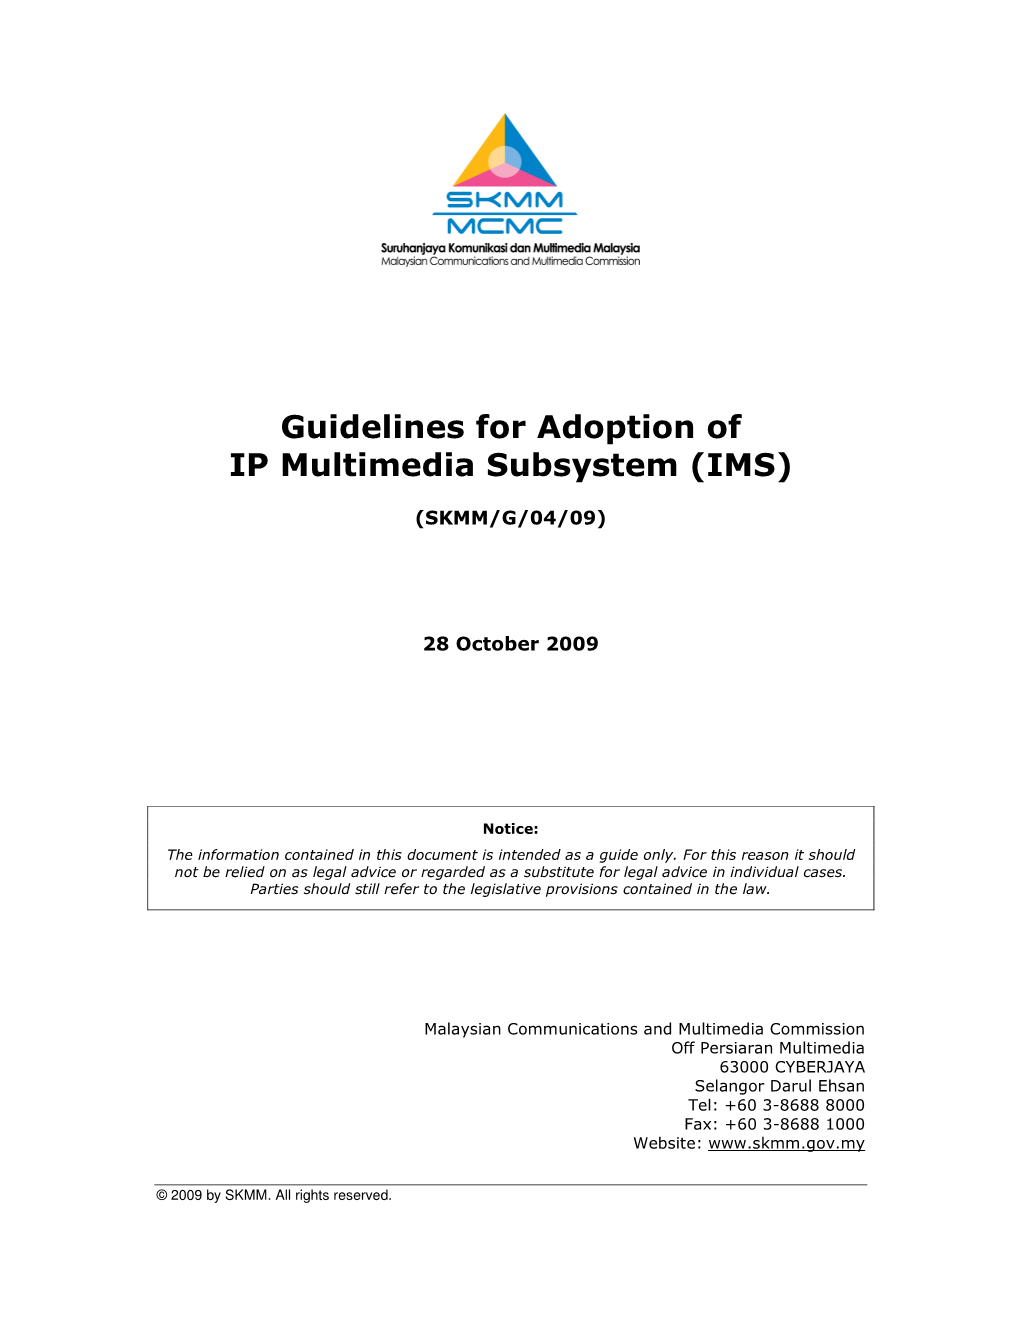 Guidelines for Adoption of IP Multimedia Subsystem (IMS)